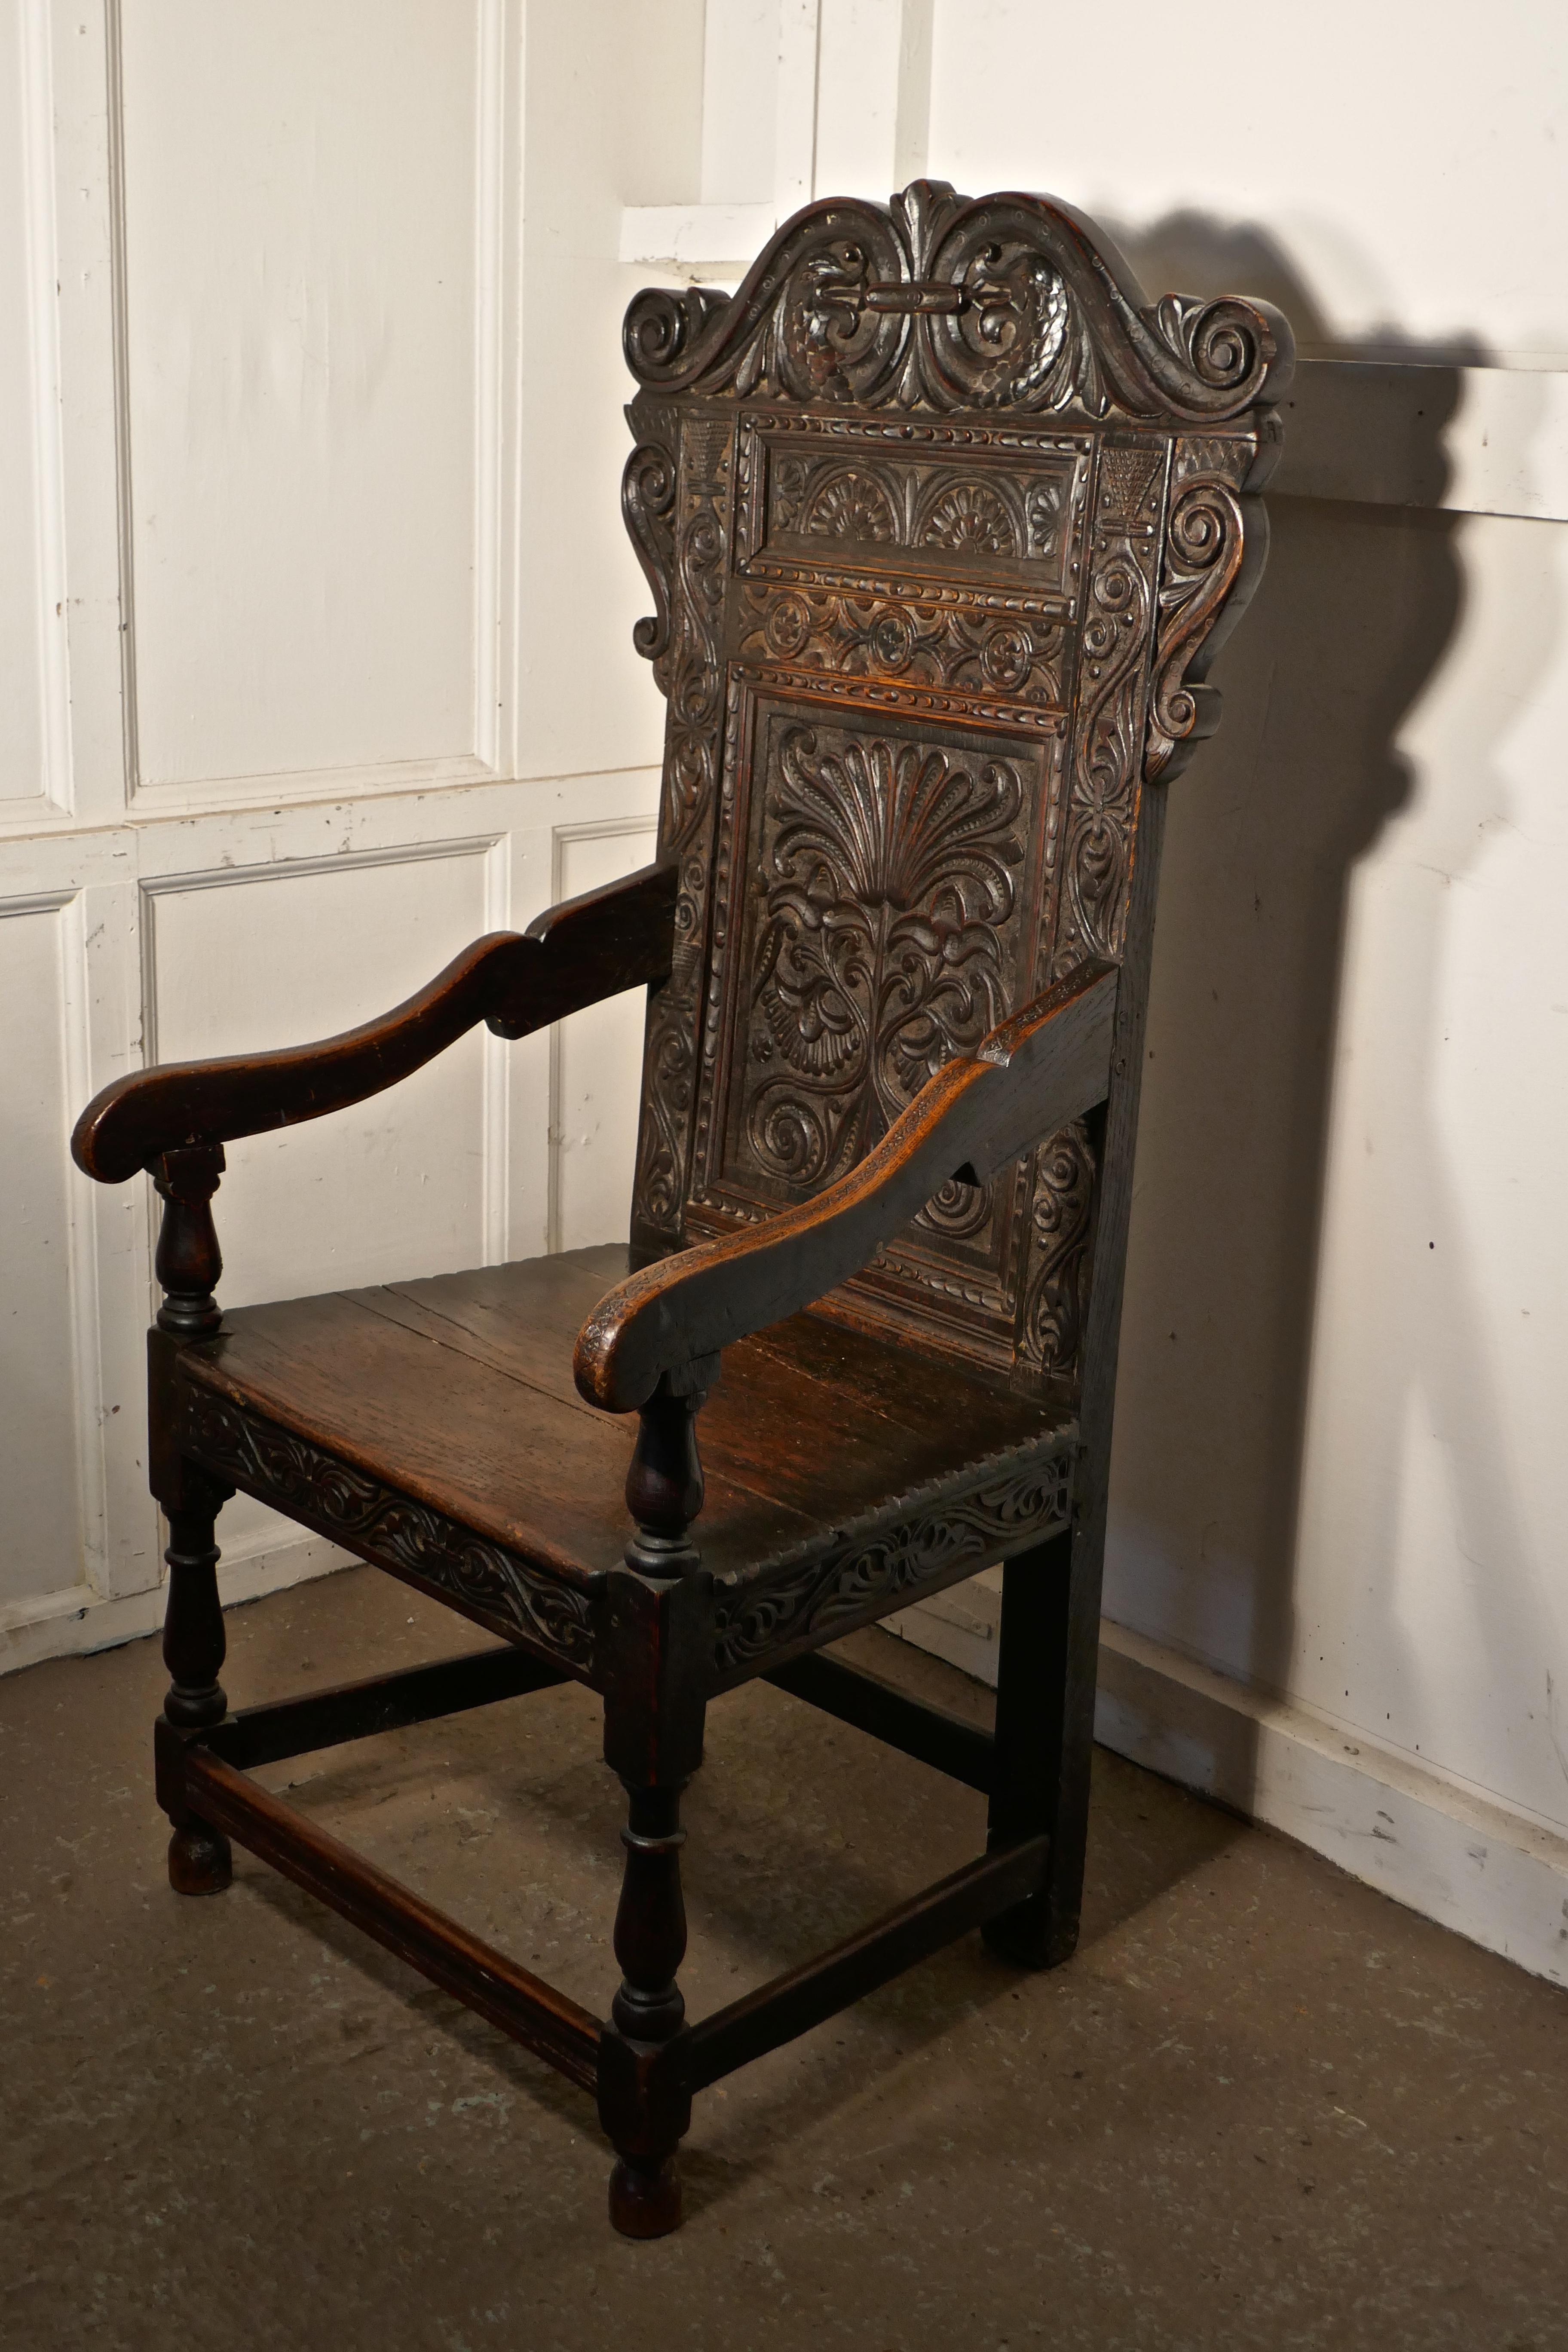 17th century carved oak wainscot chair

This Handsome Chair, has a magnificent patina, the solid plank seat has a carved border at the front, the turned legs and uprights support the arm rests, all set off with a decorative high carved throne back